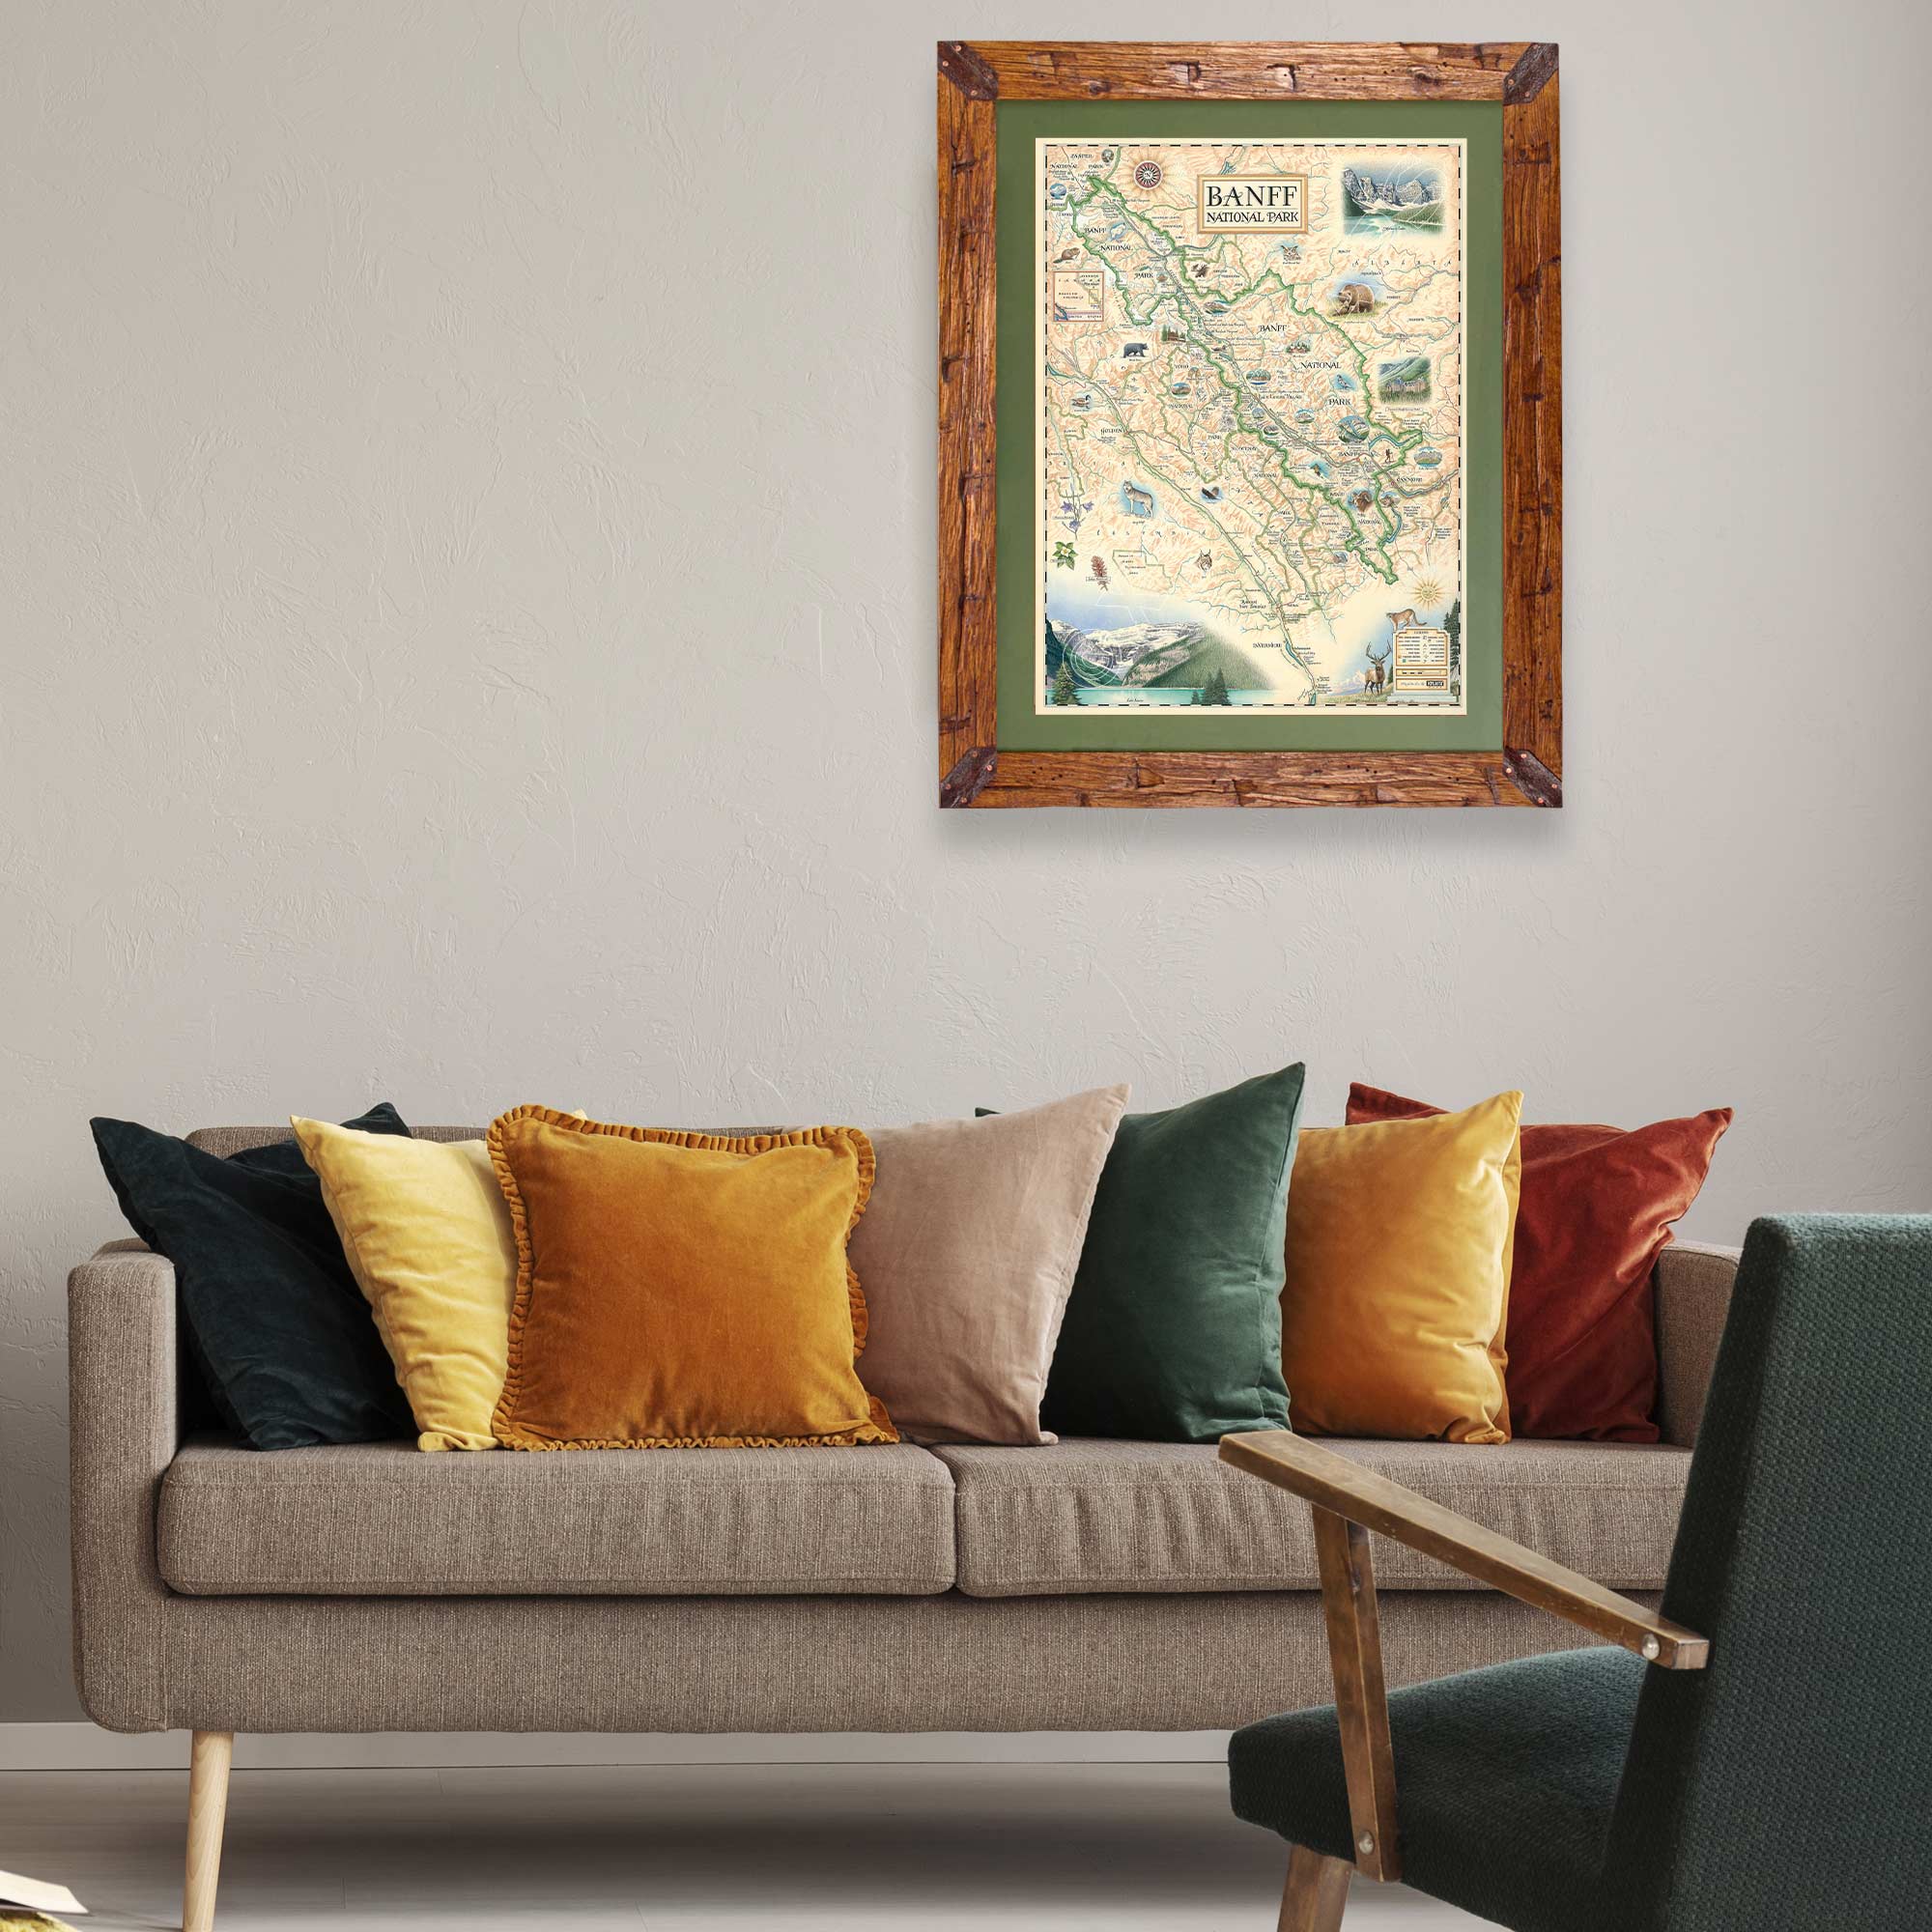  Banff National Park hand-drawn map in a Montana hand-scraped pine wood frame with green mat. The map is hanging over a couch in a living room with colorful pillows.